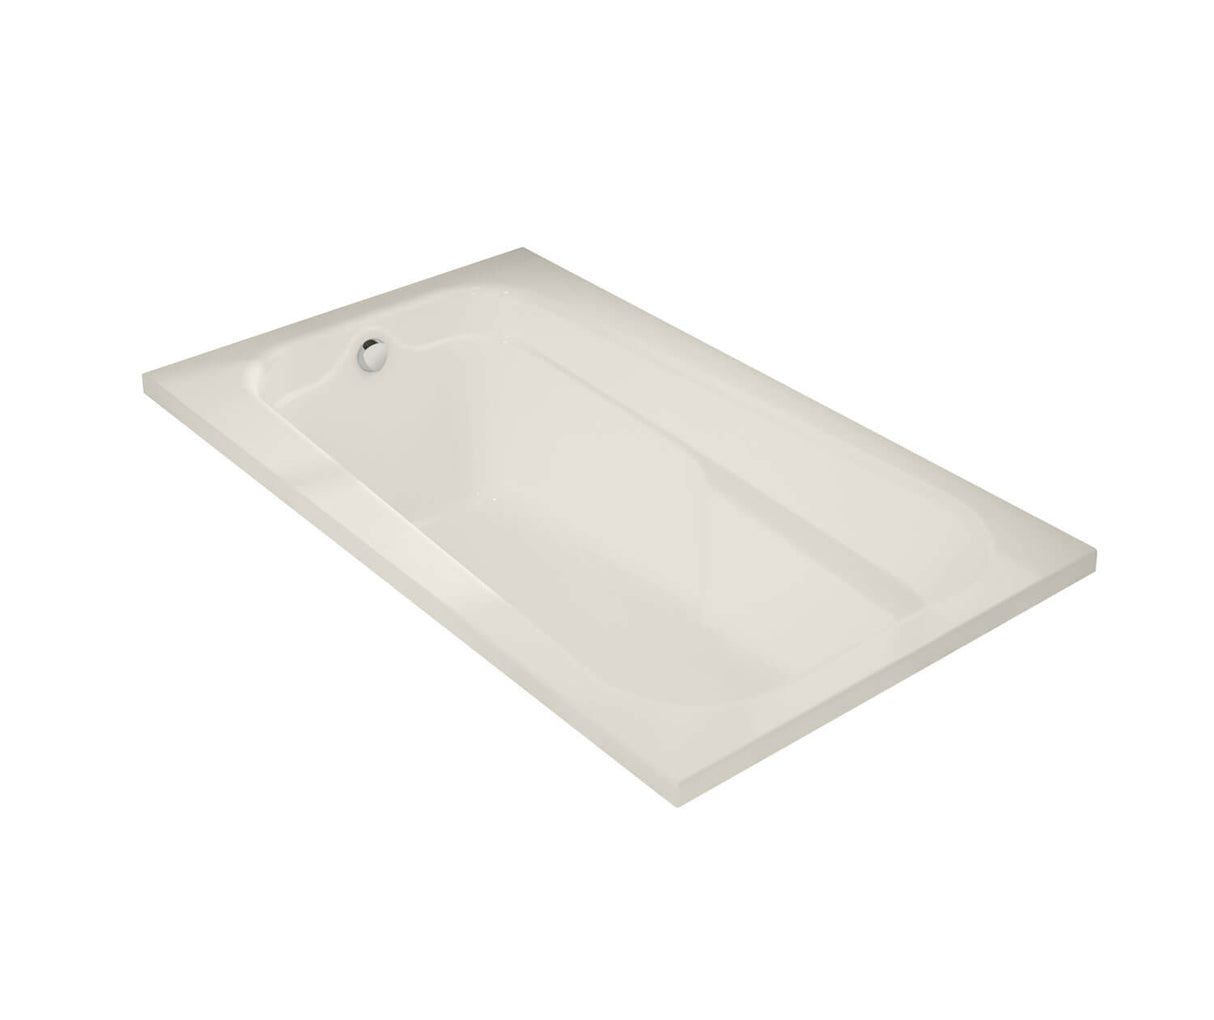 MAAX 100103-003-007-000 Tempest 60 x 36 Acrylic Alcove End Drain Whirlpool Bathtub in Biscuit